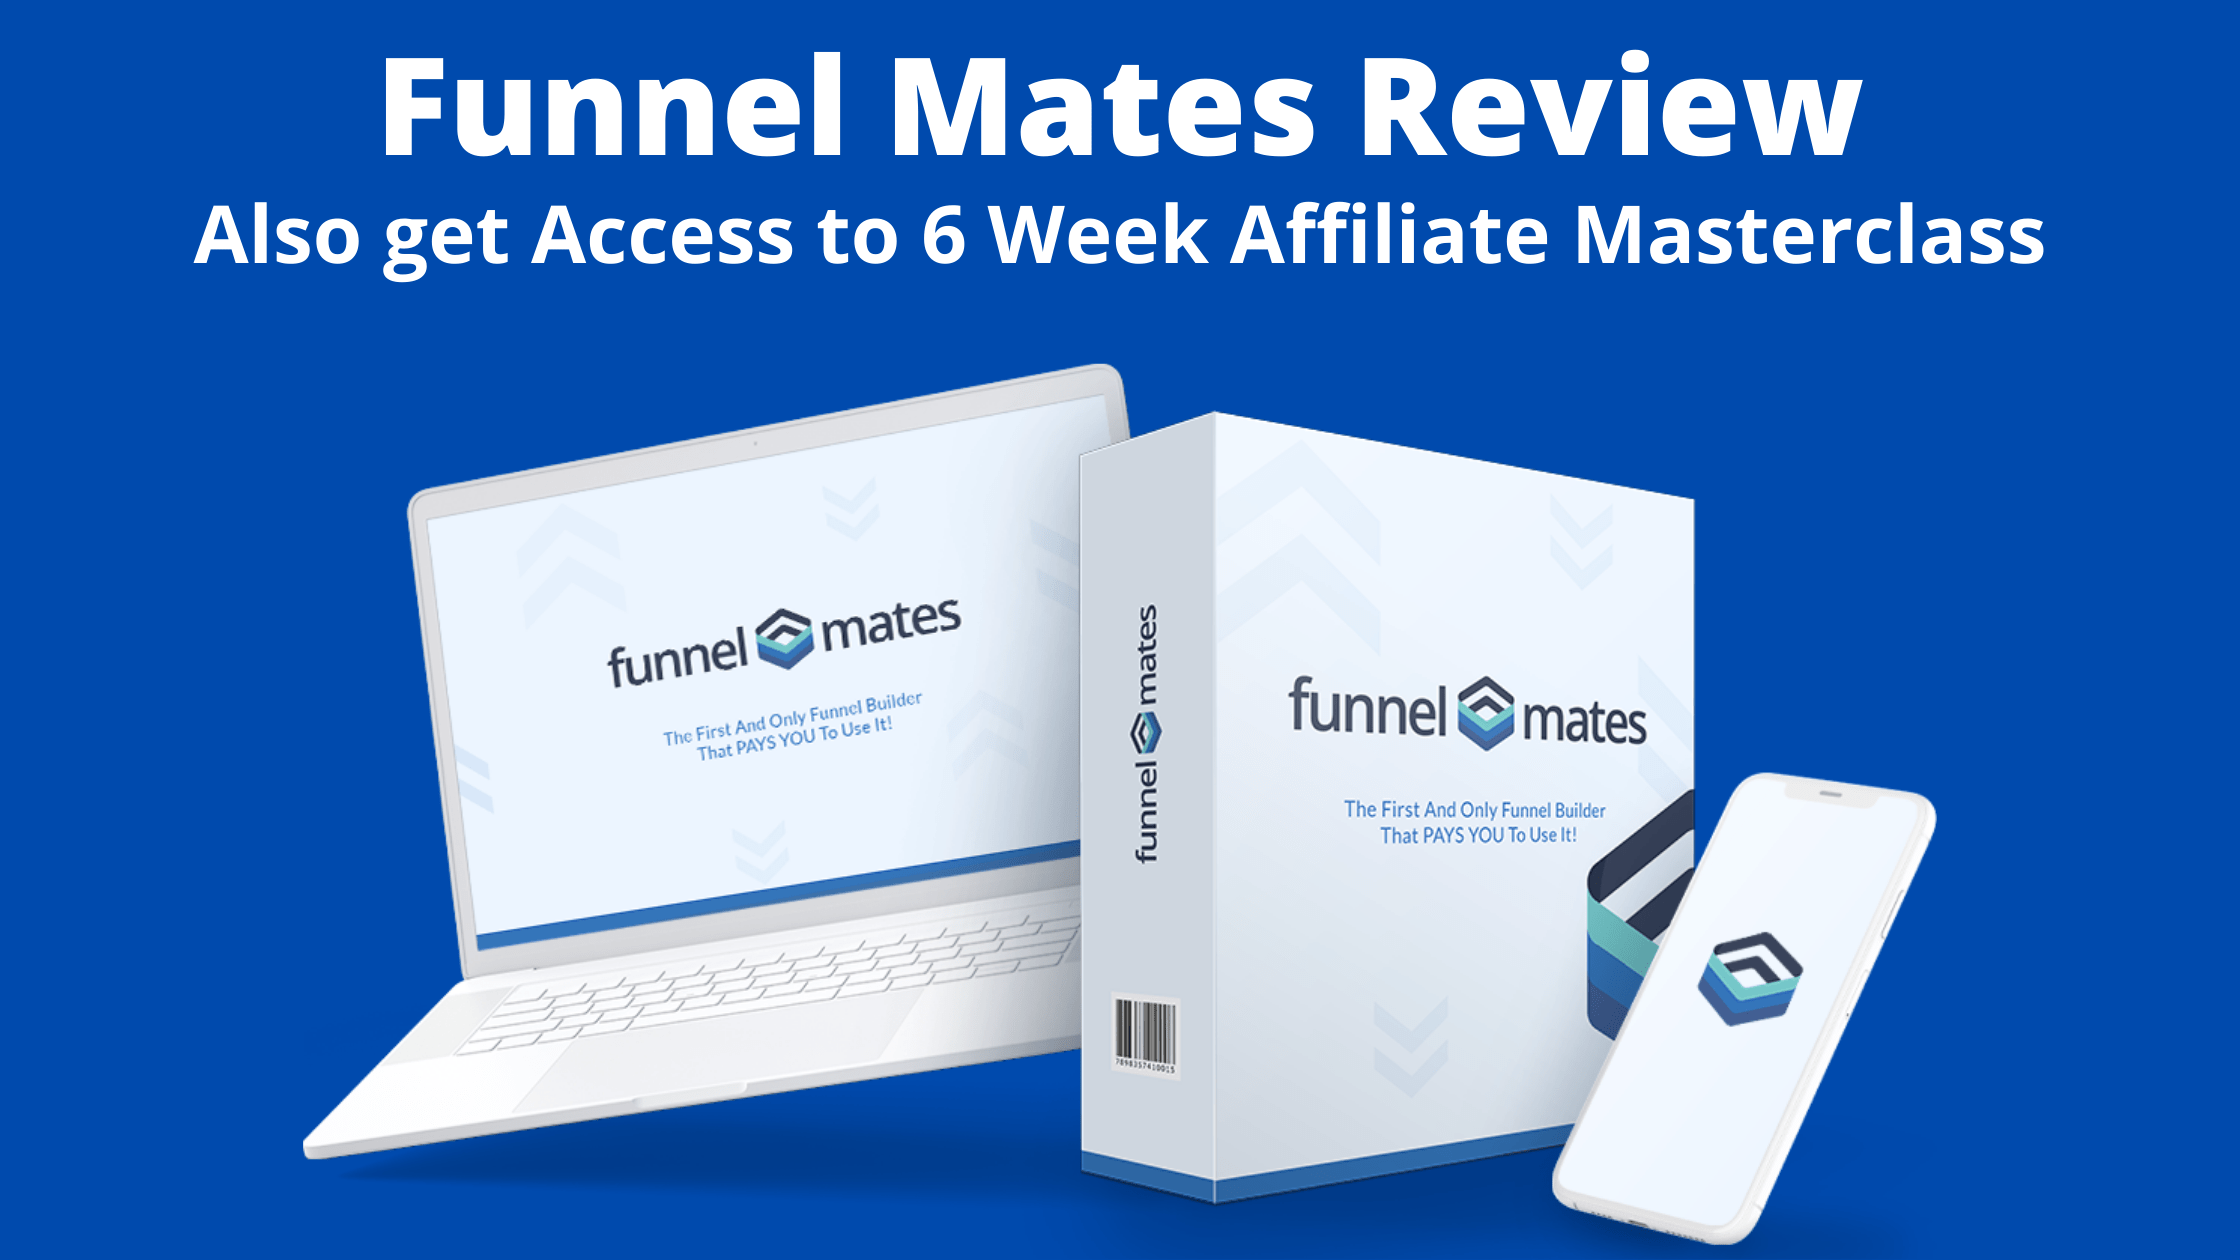 Funnel Mates Review